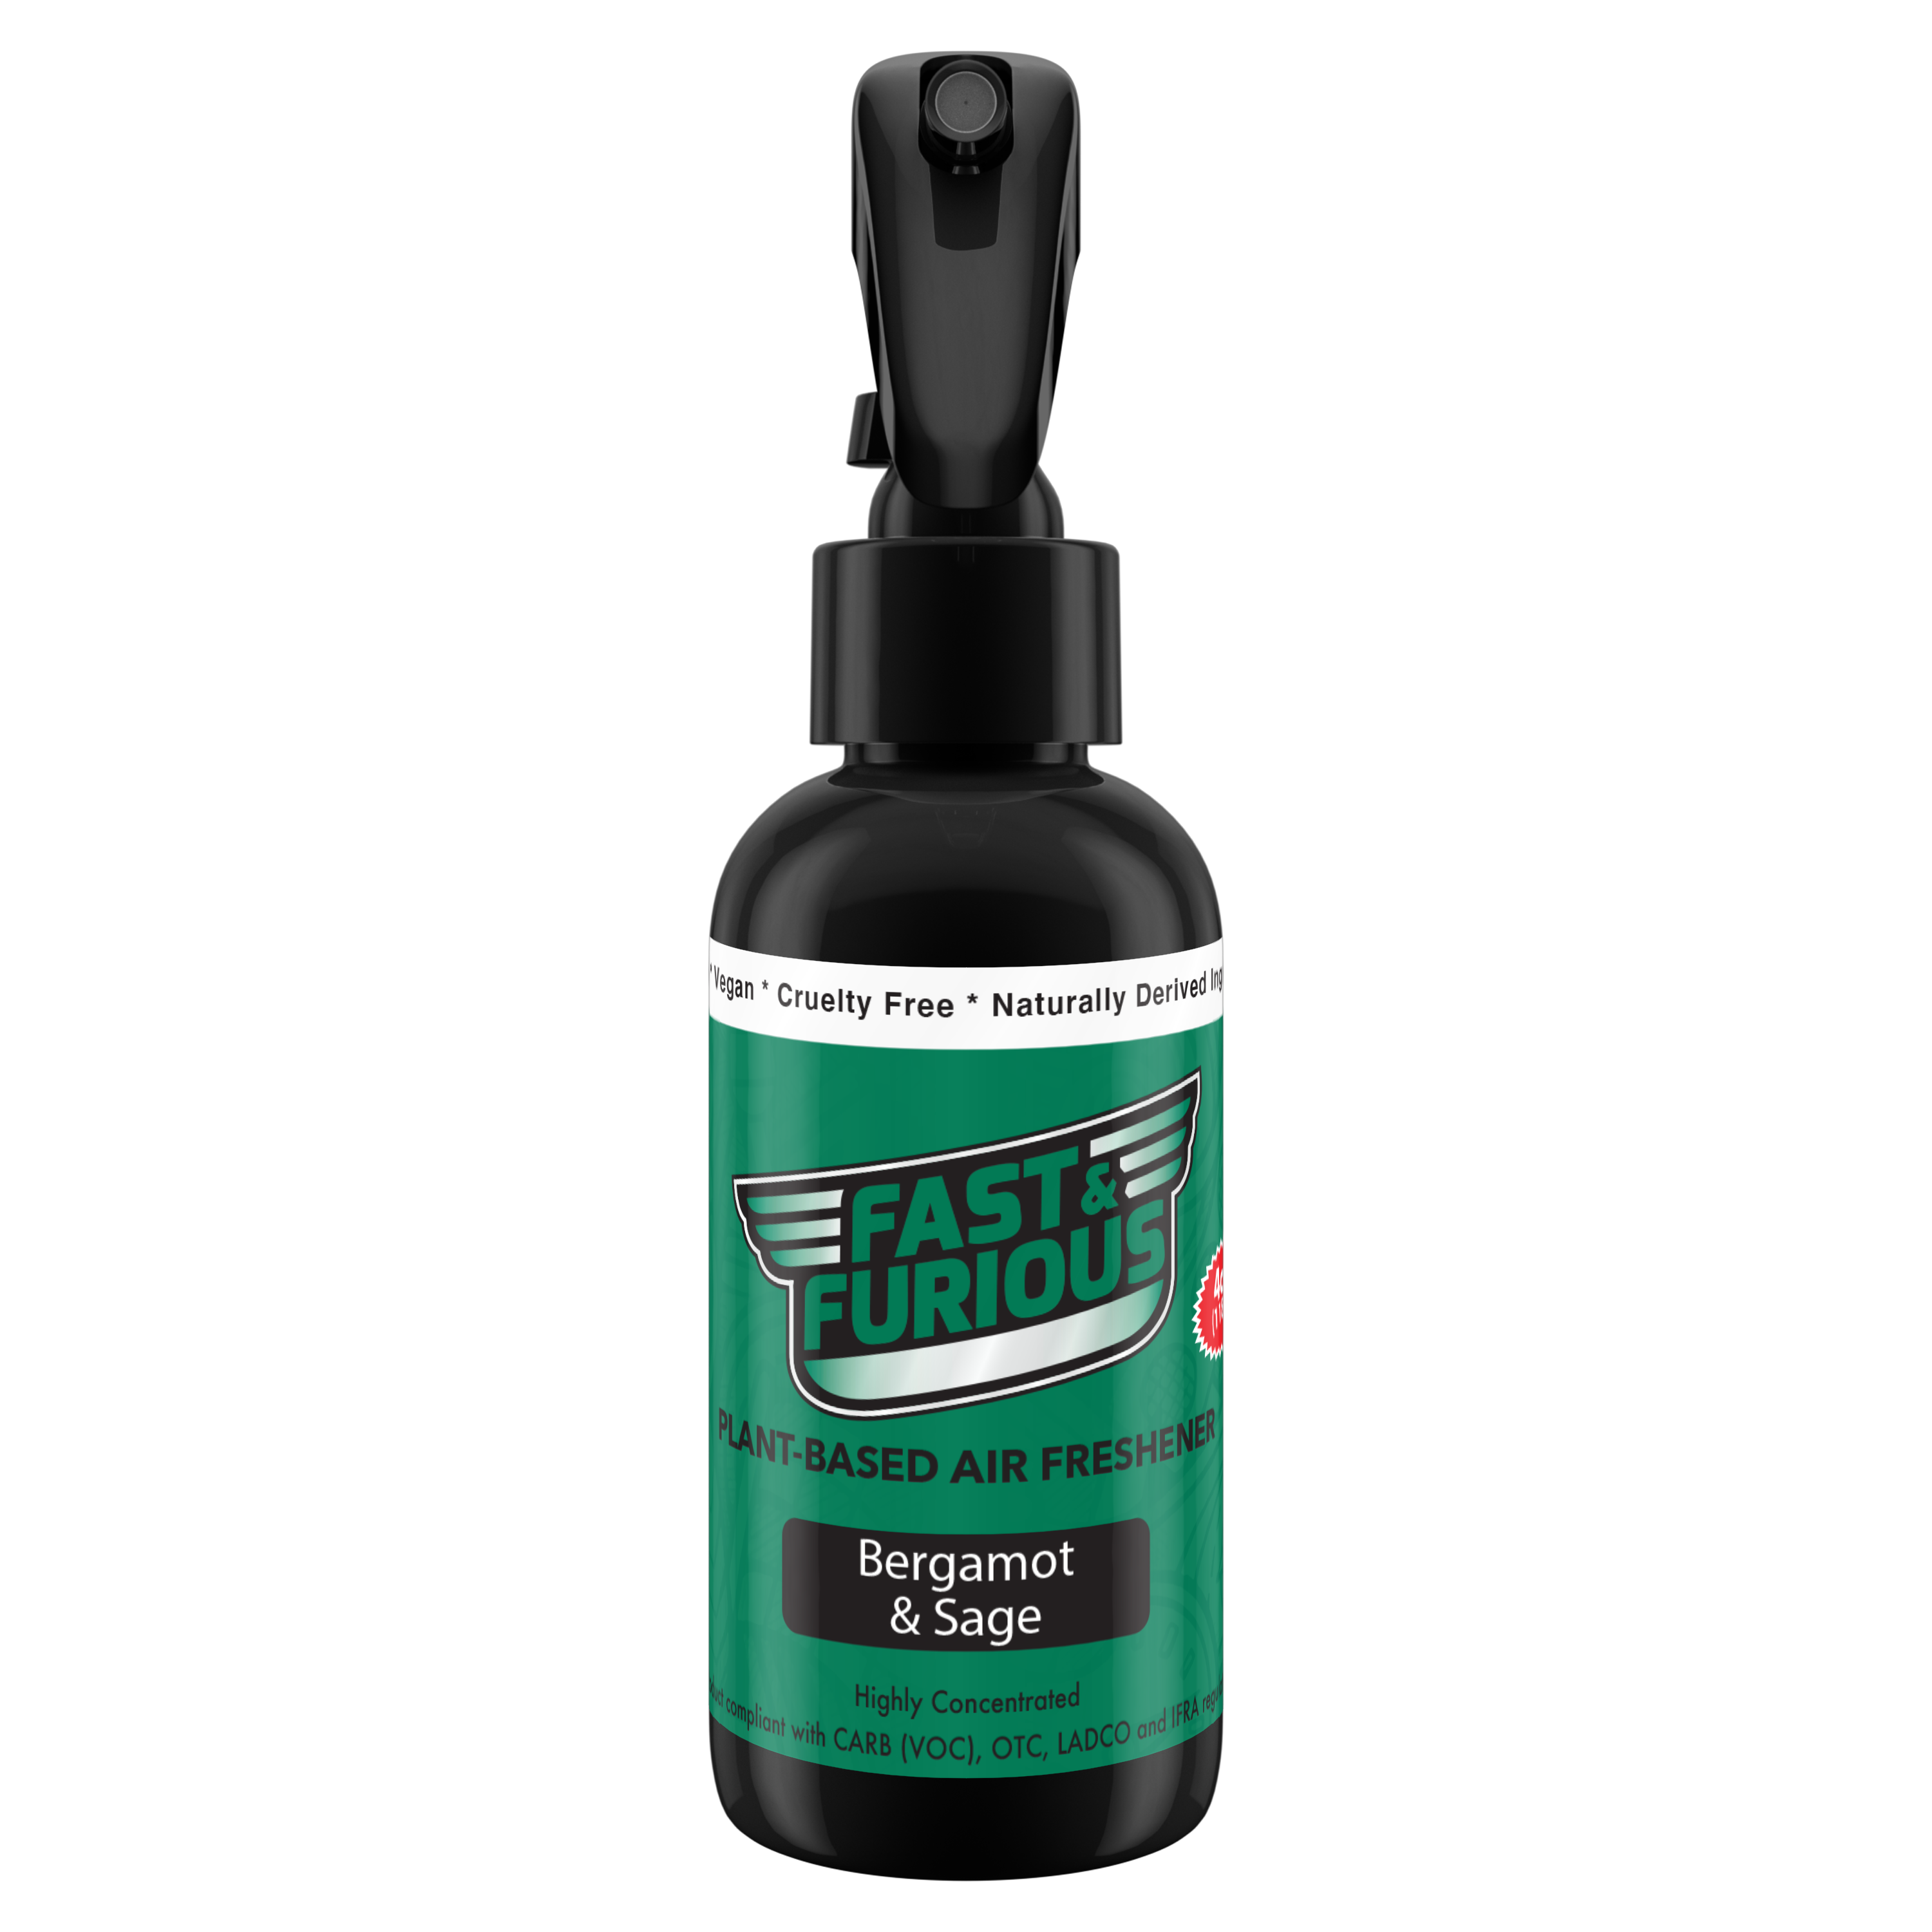 Fast and Furious Plant-Based Air Freshener - Bergamot & Sage Scent